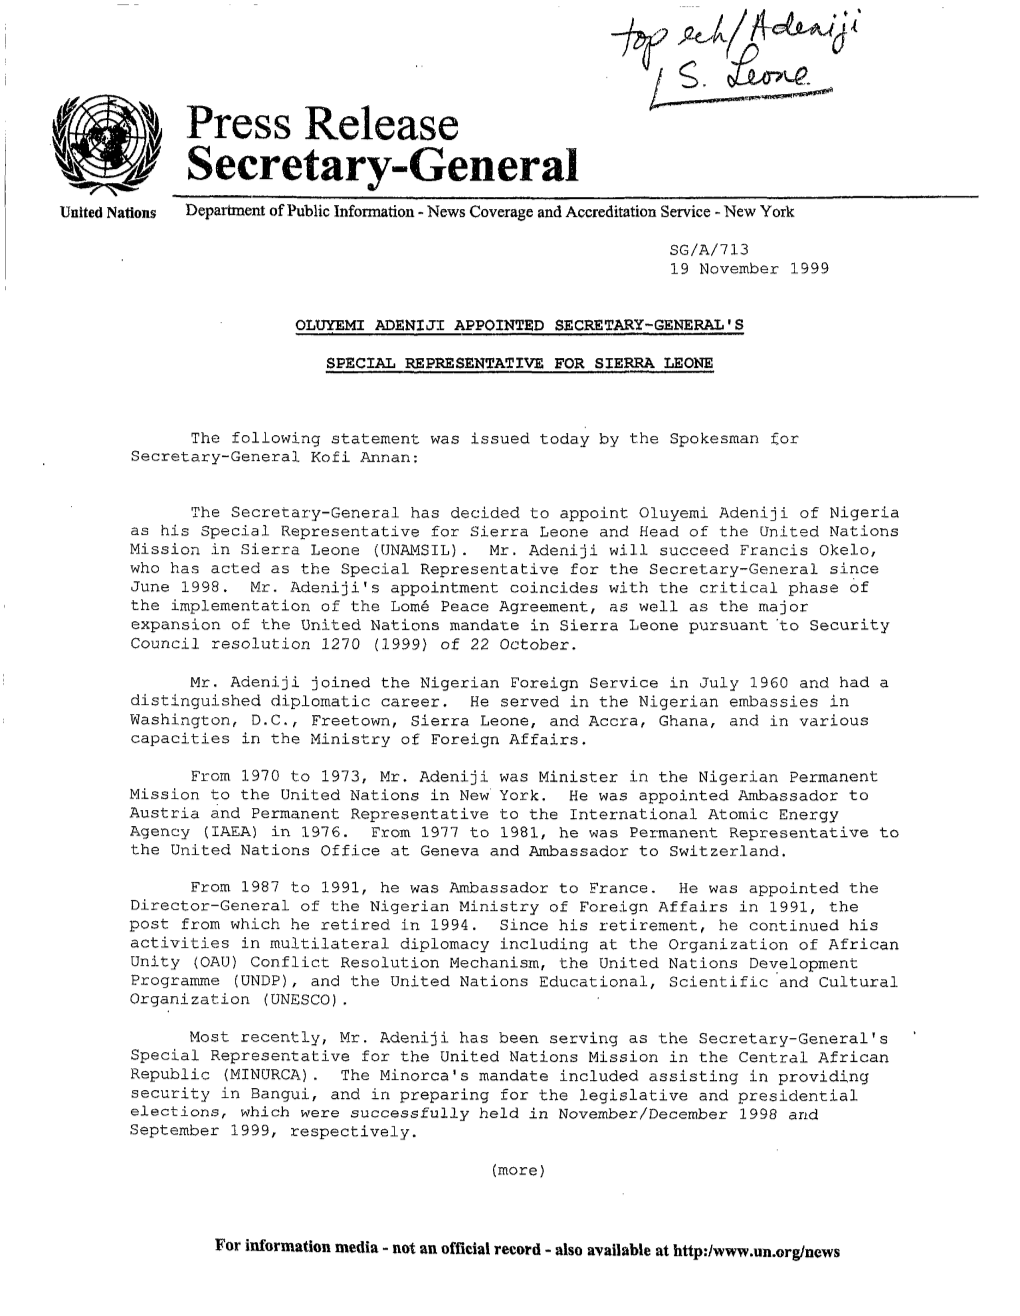 Press Release Secretary-General United Nations Department of Public Information - News Coverage and Accreditation Service - New York